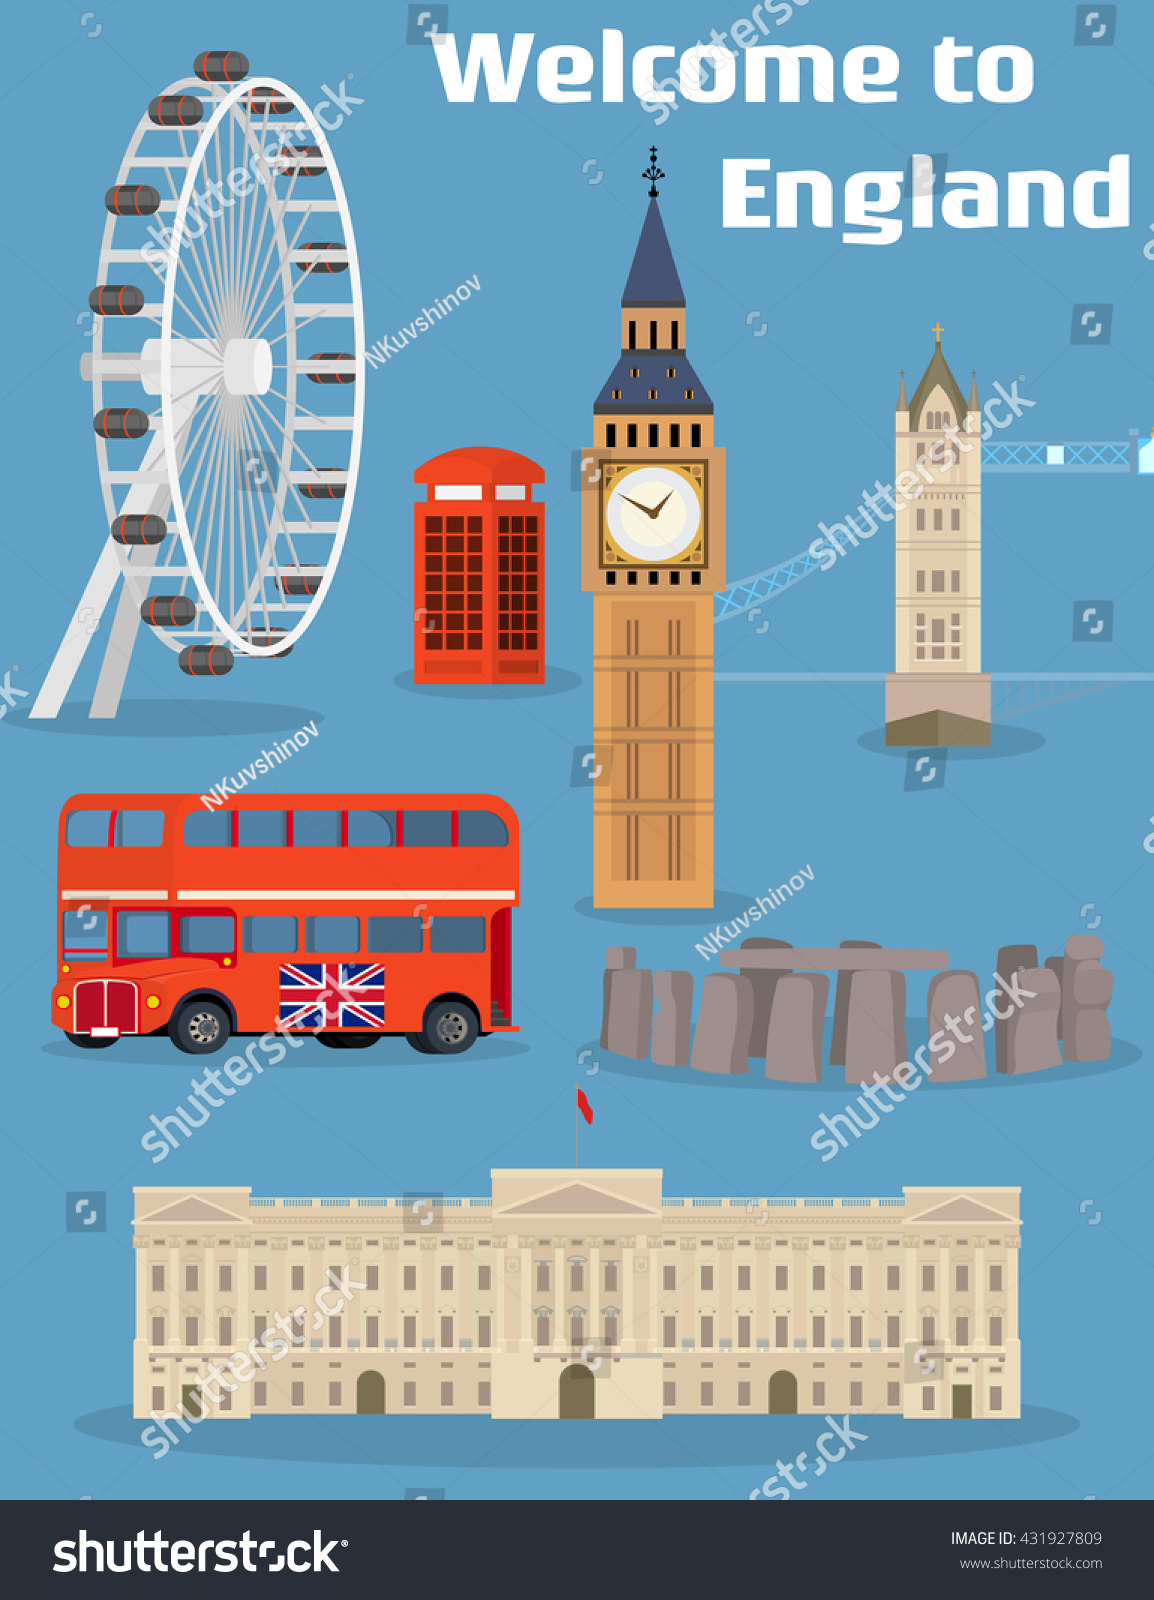 SVG of Welcome to England - Vector set of the London famous place and landmark with Tower Bridge, Big Ben, London Eye, Red phone booth, Red double-decker bus and Buckingham Palace. On flat style svg